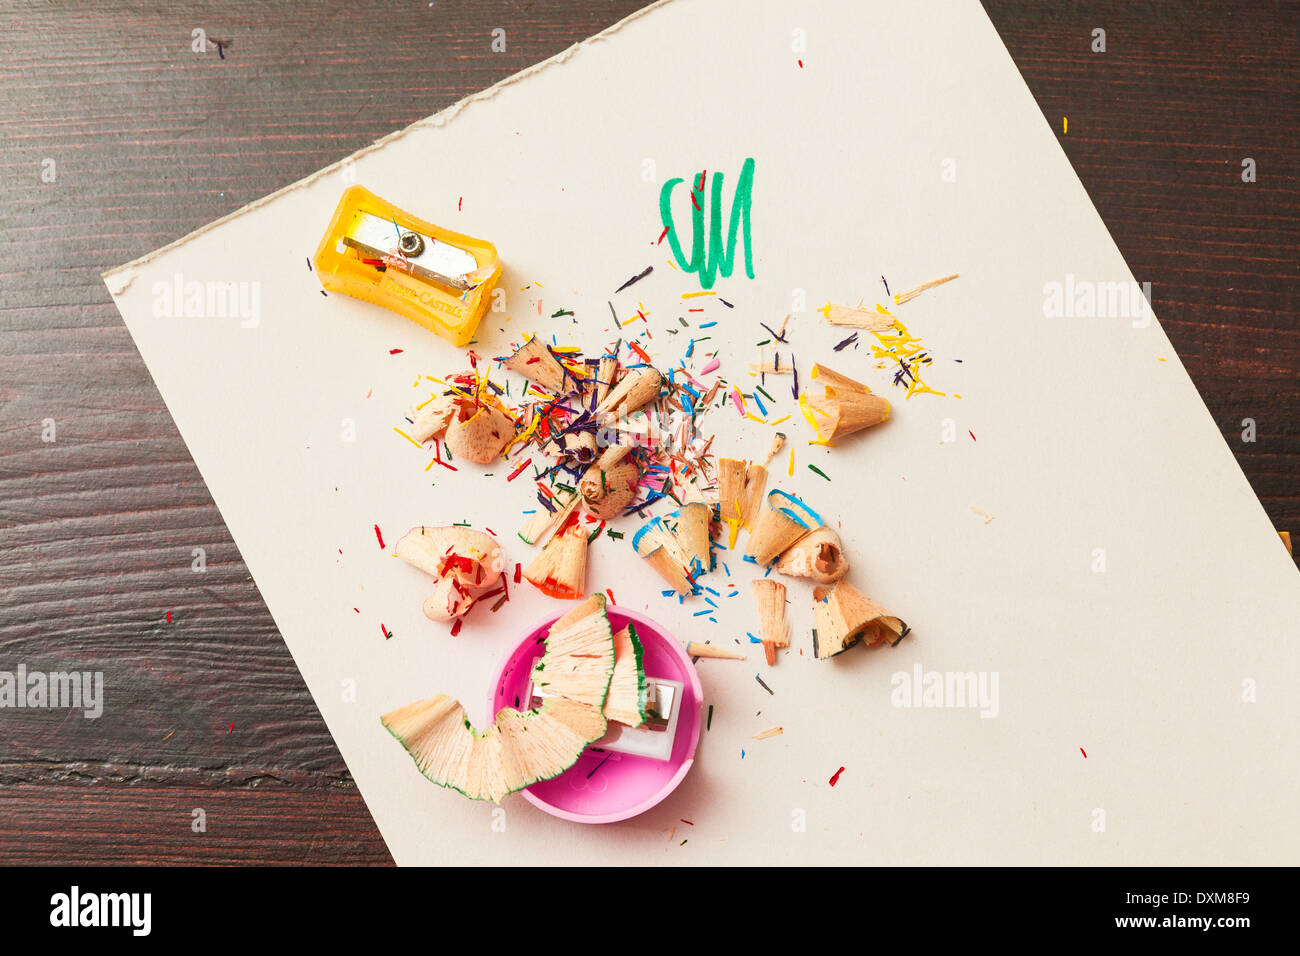 Colorful Pencil Shavings and Pencil Sharpeners Stock Photo